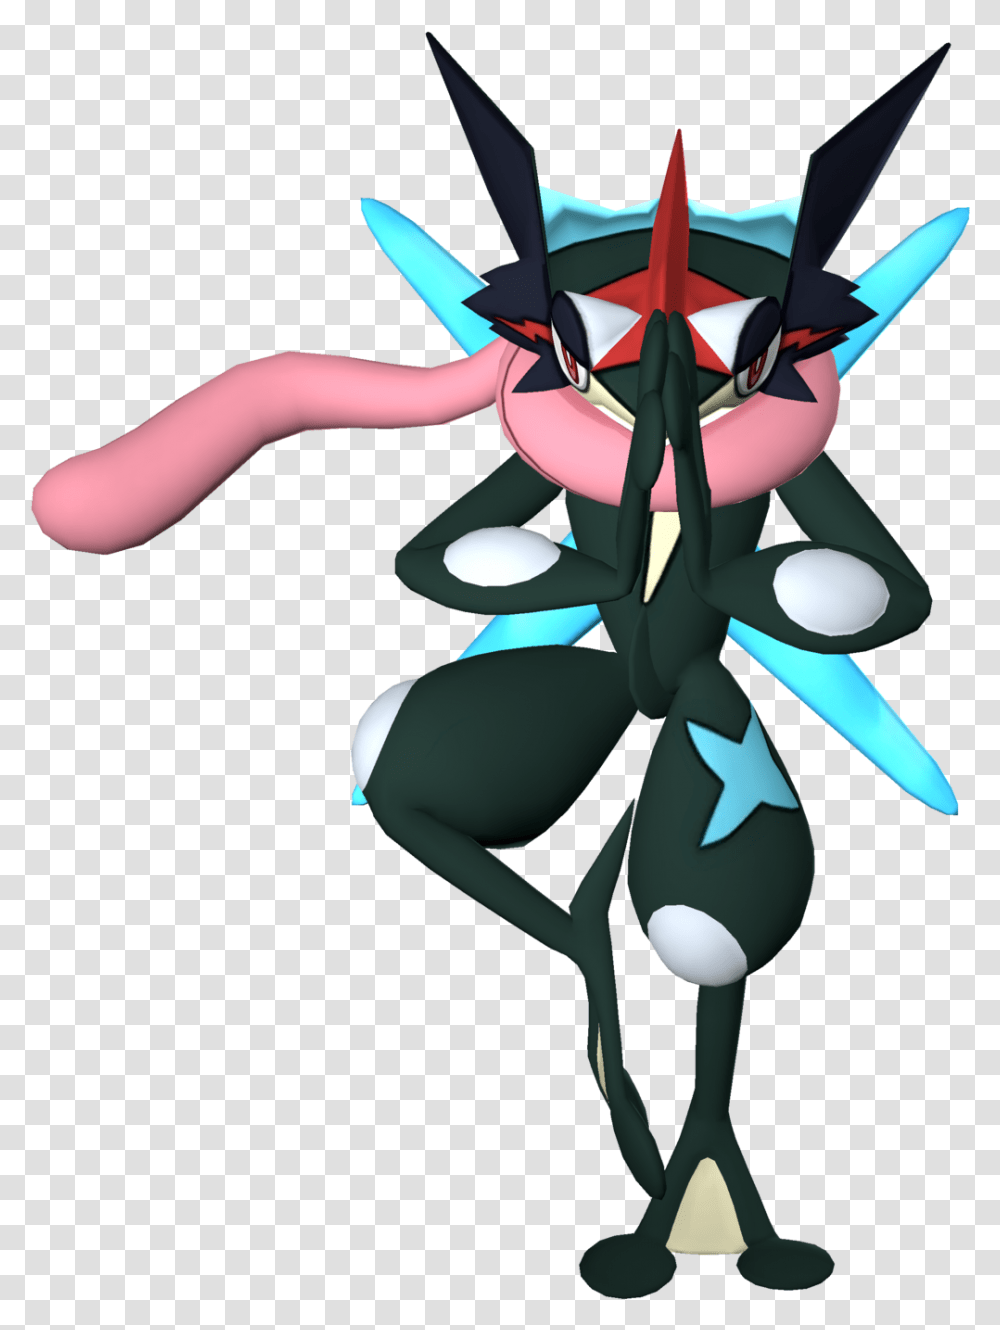 Image Result For Pictures Of Greninja The Pokemon, Toy, Pattern Transparent Png